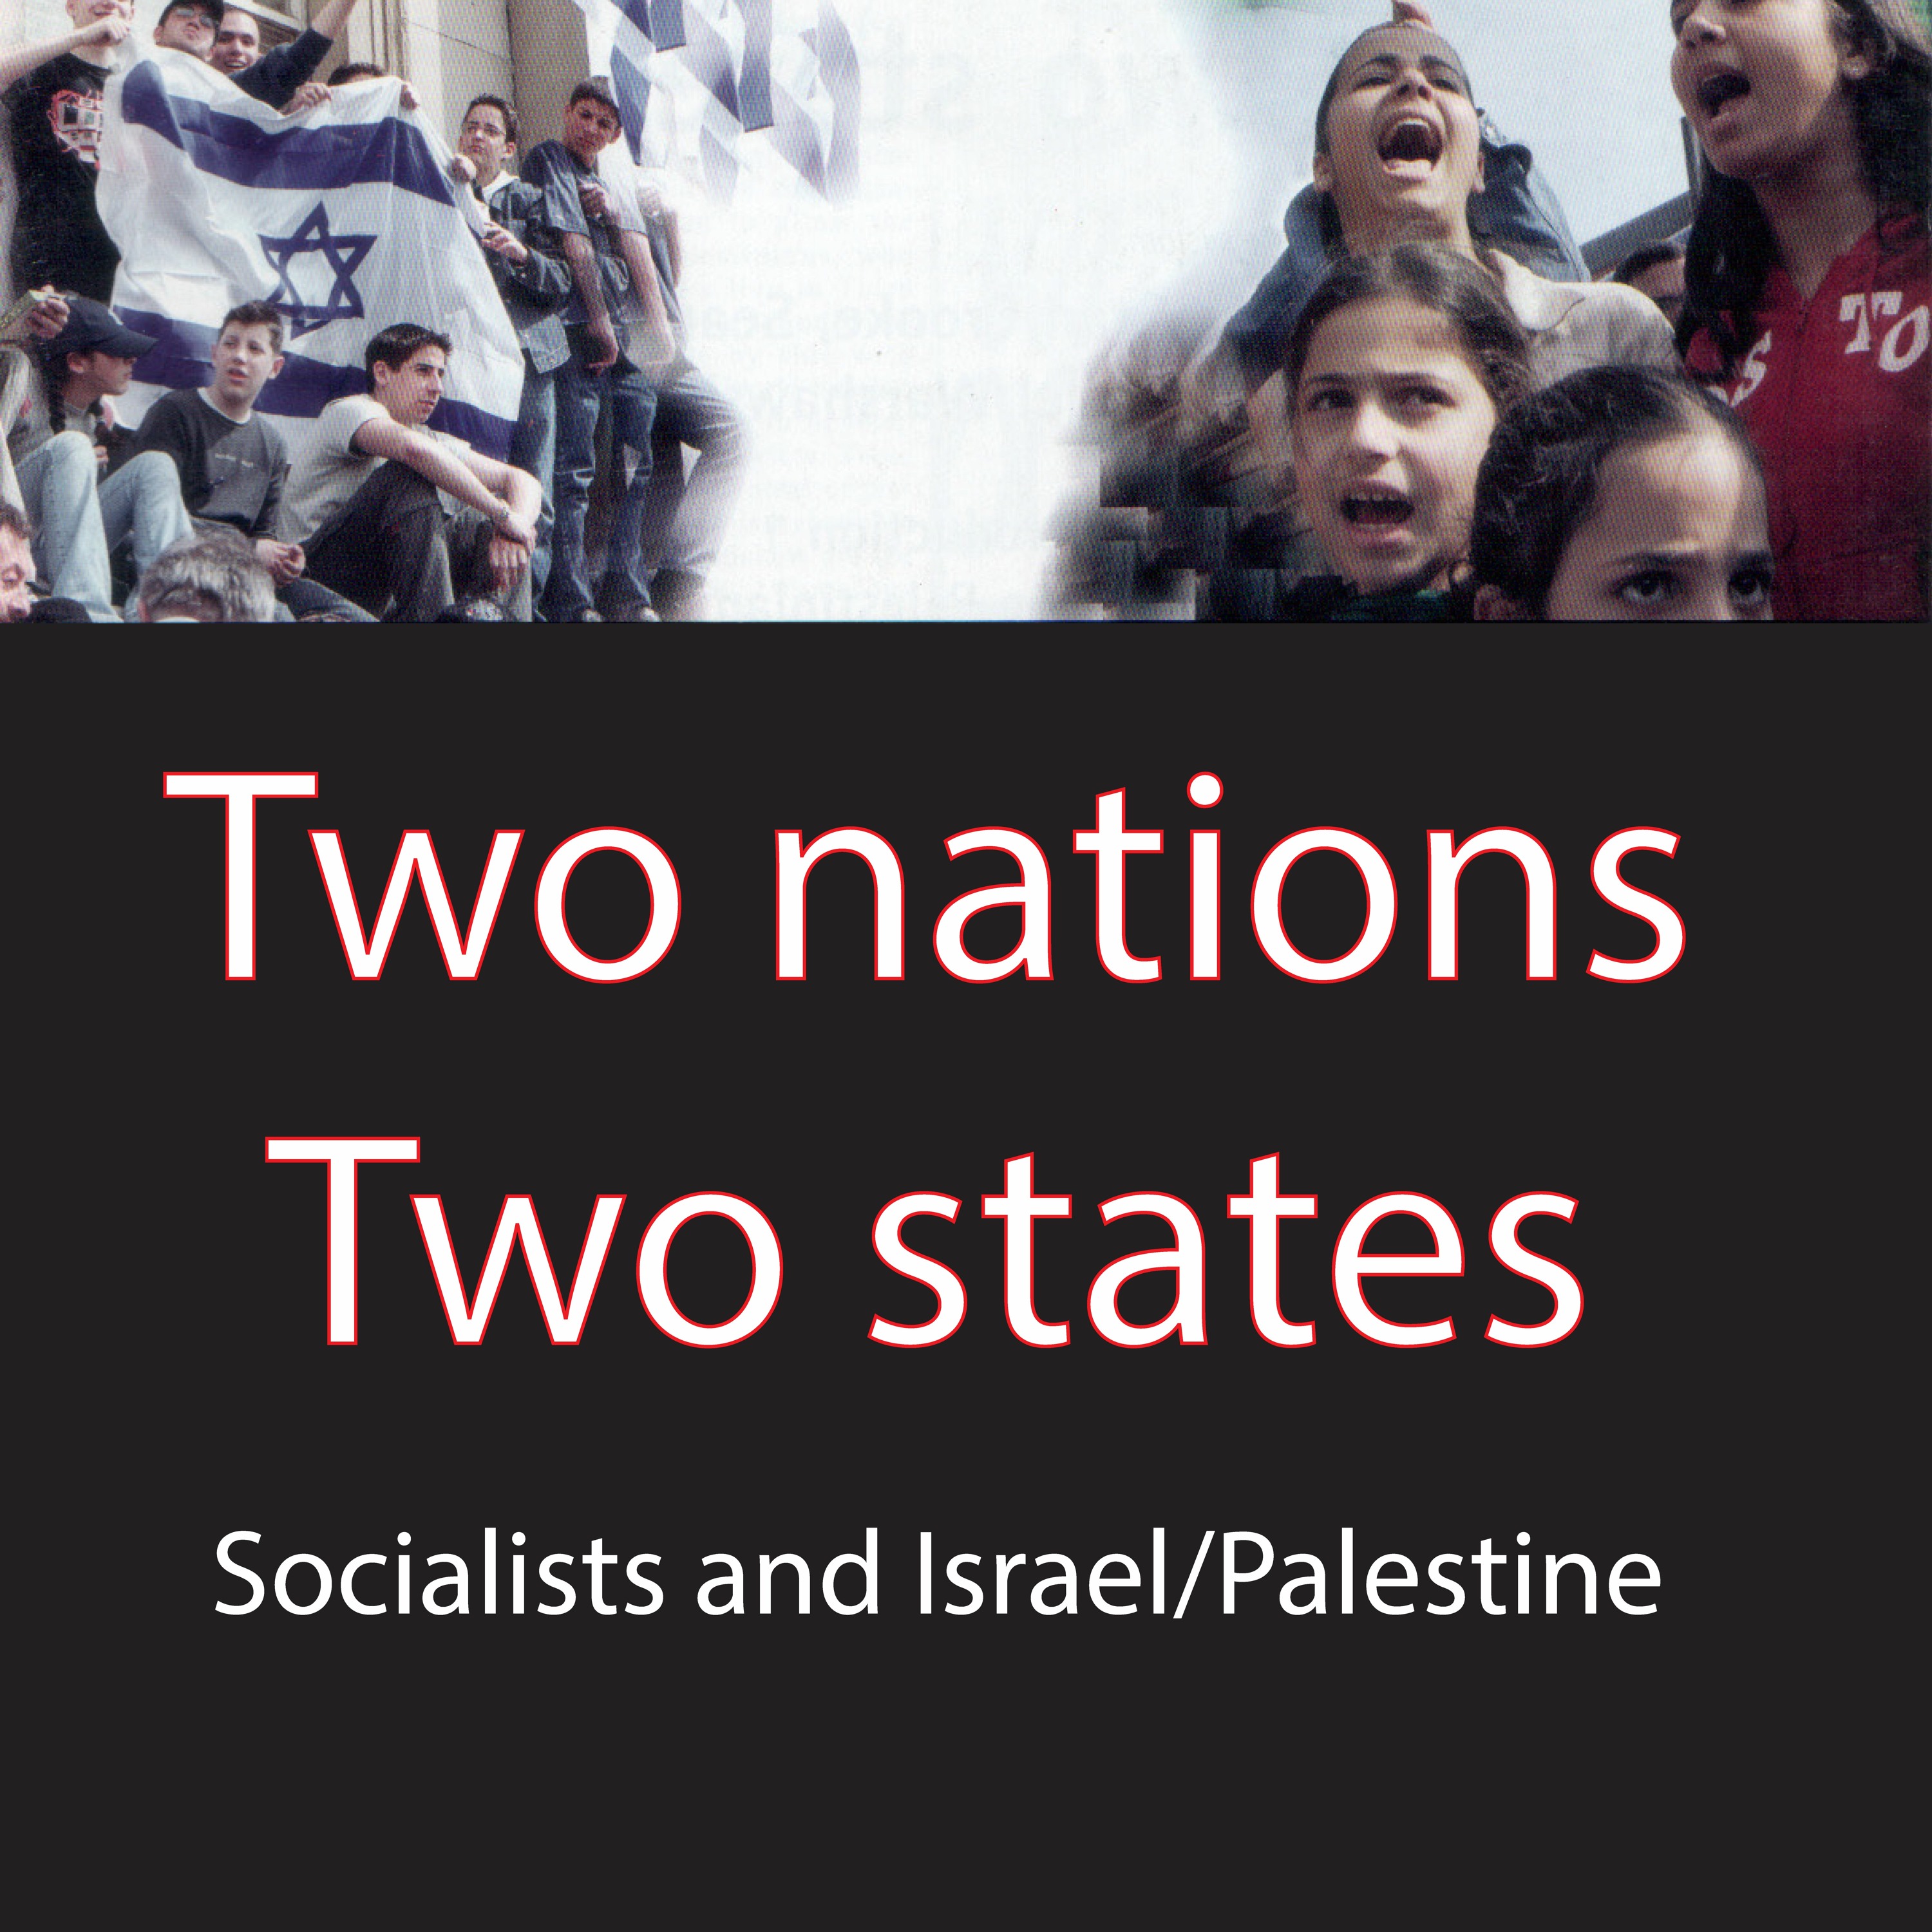 Two nations, two states — Socialists and Israel/Palestine